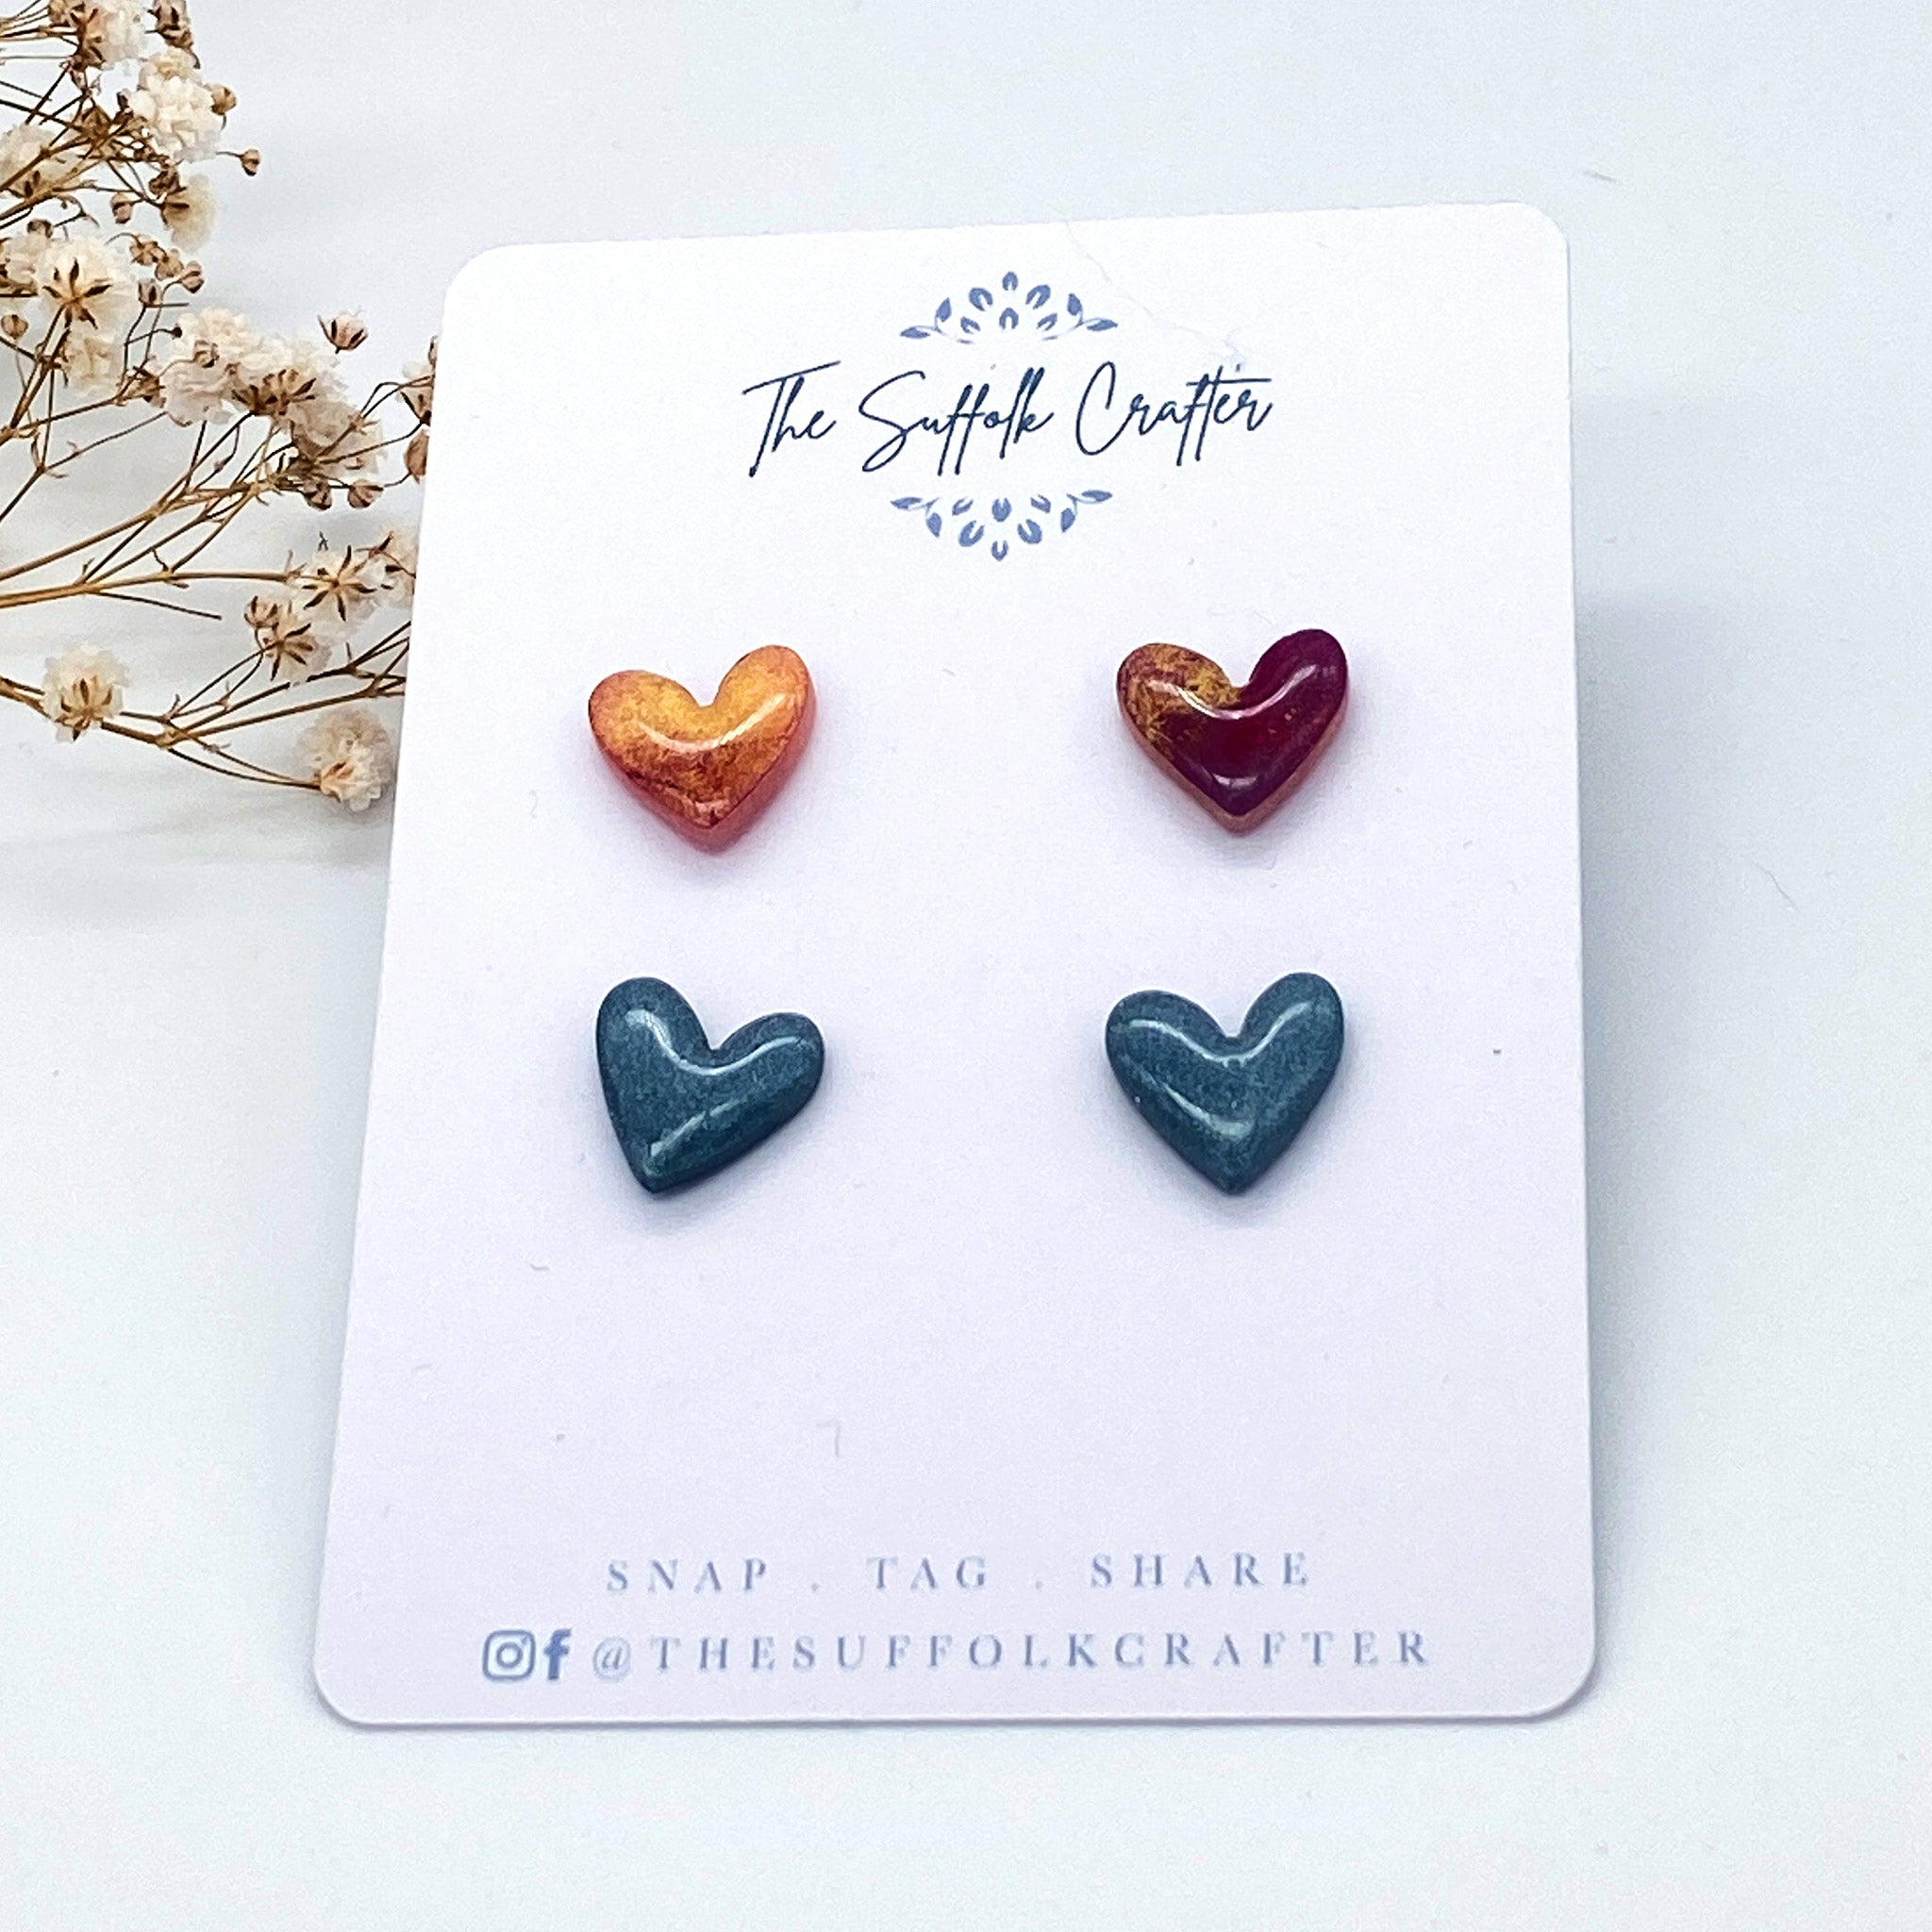 2 Pairs of Heart Shaped Stud Earrings - The Suffolk Crafter